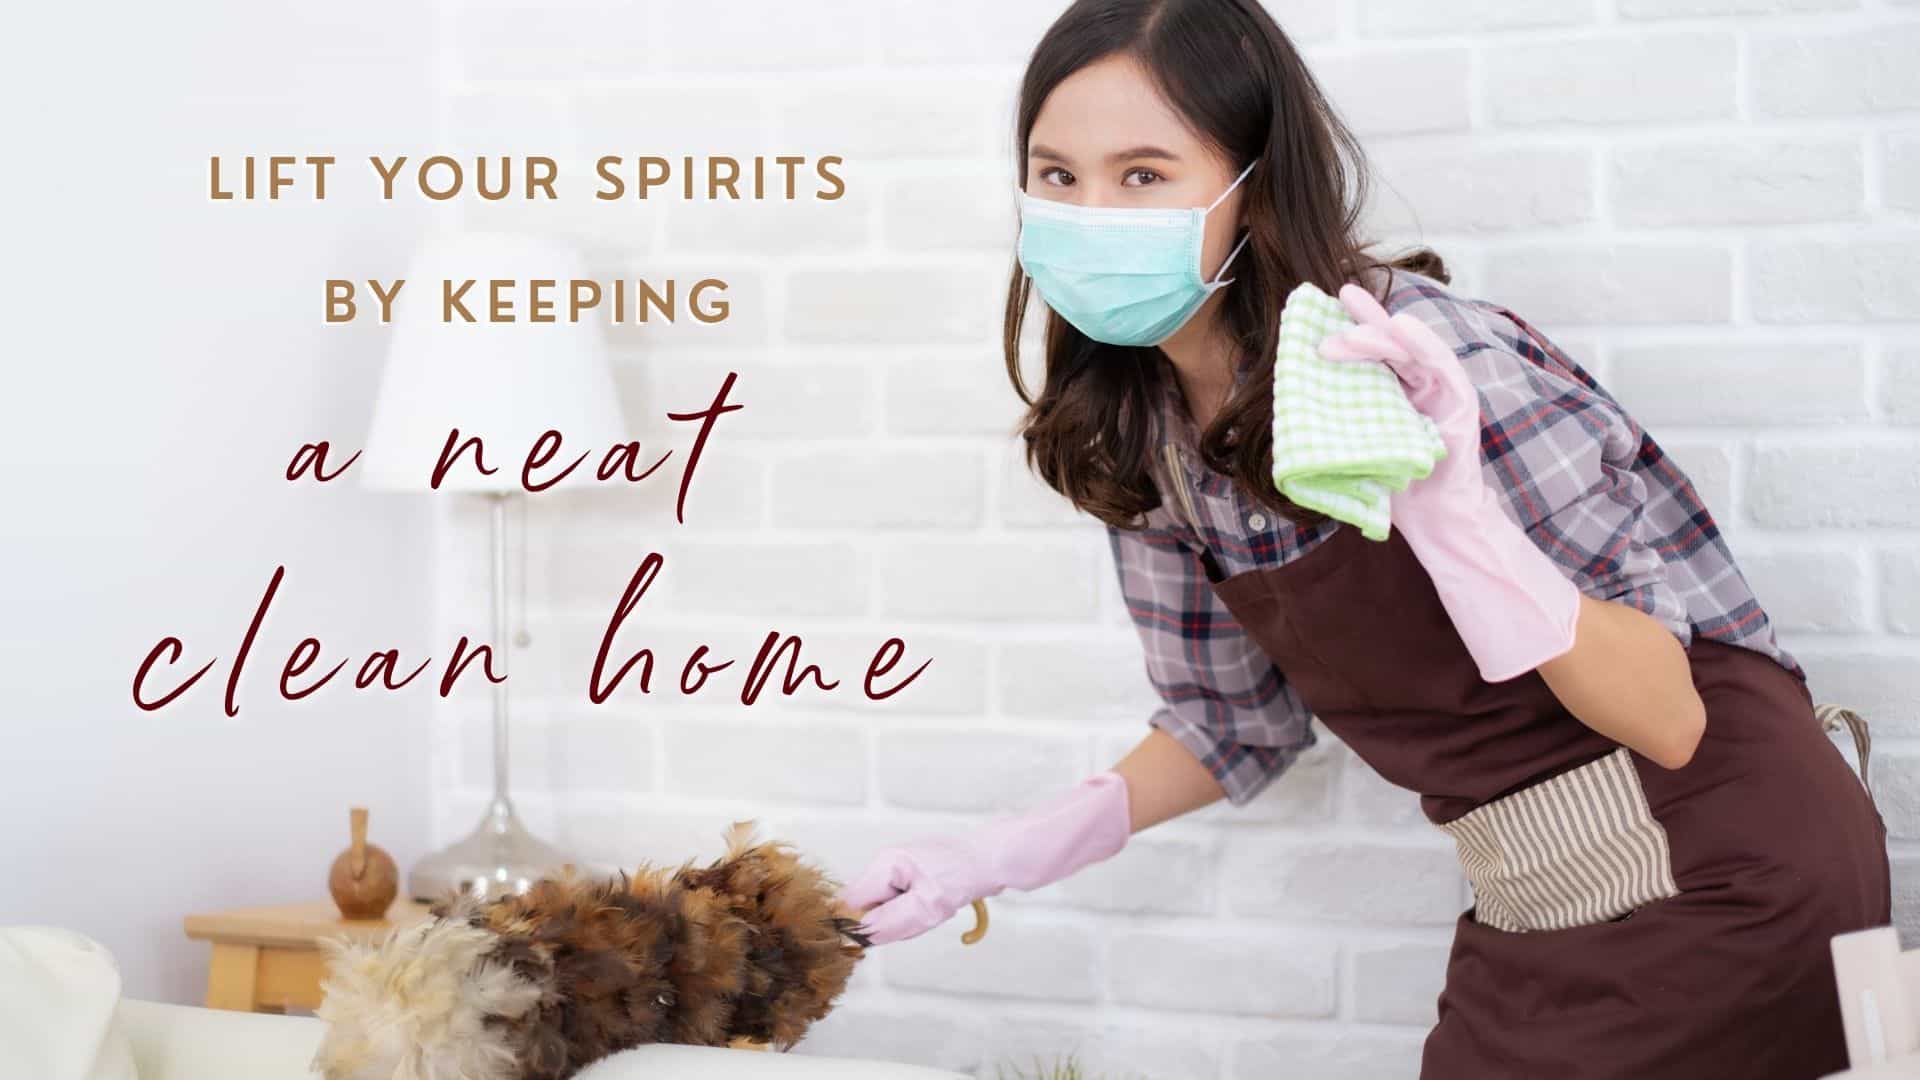 Lift Your Spirits by Keeping a Neat Clean Home